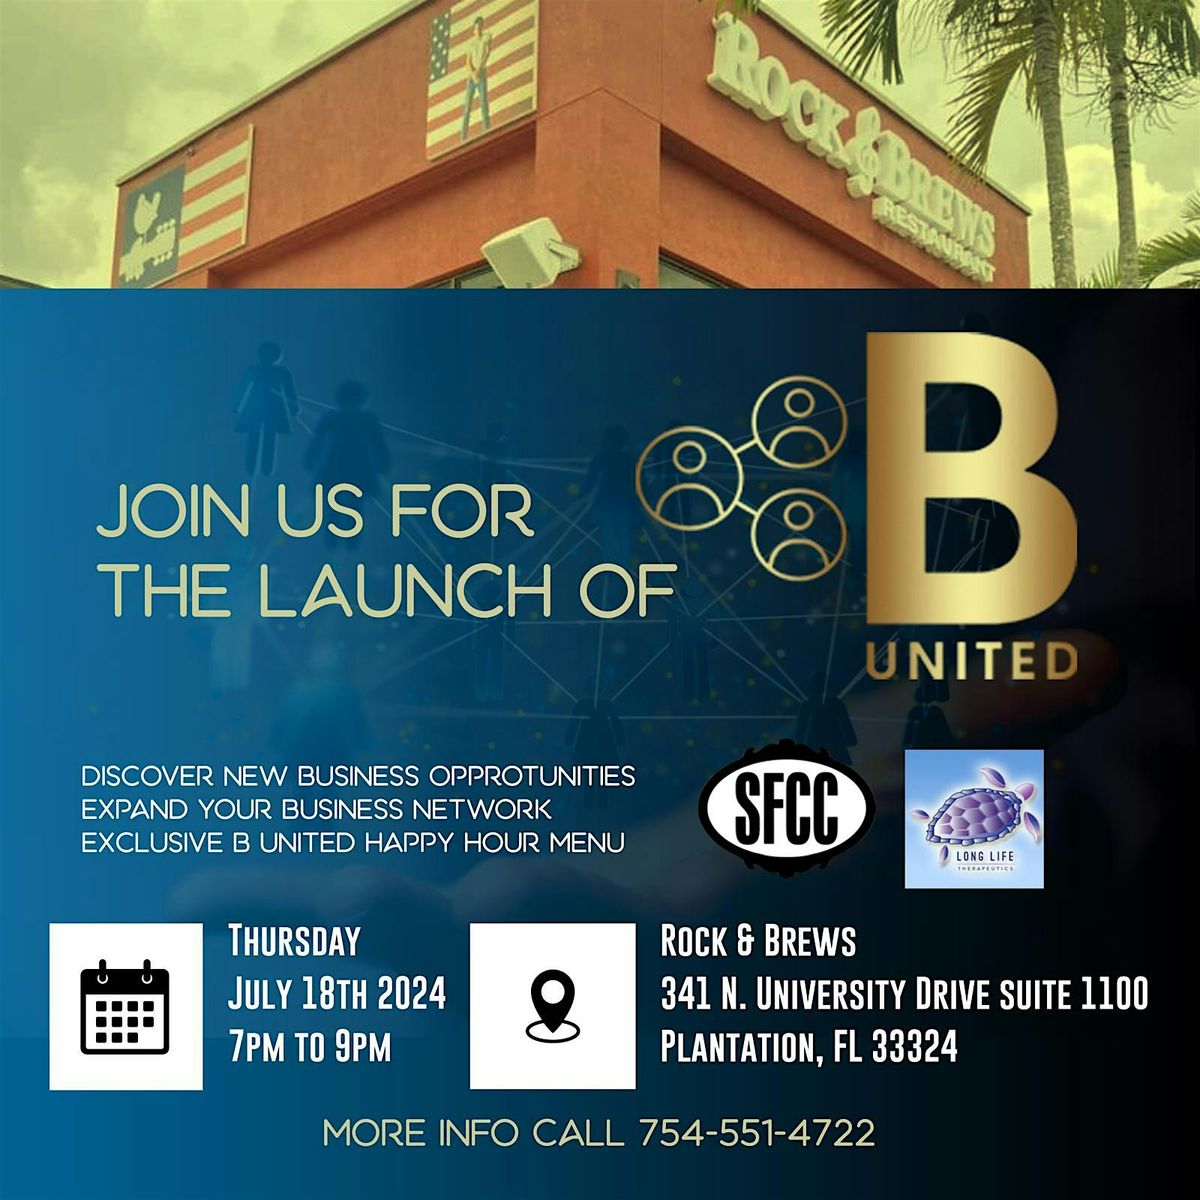 Join Us for the Launch of B United